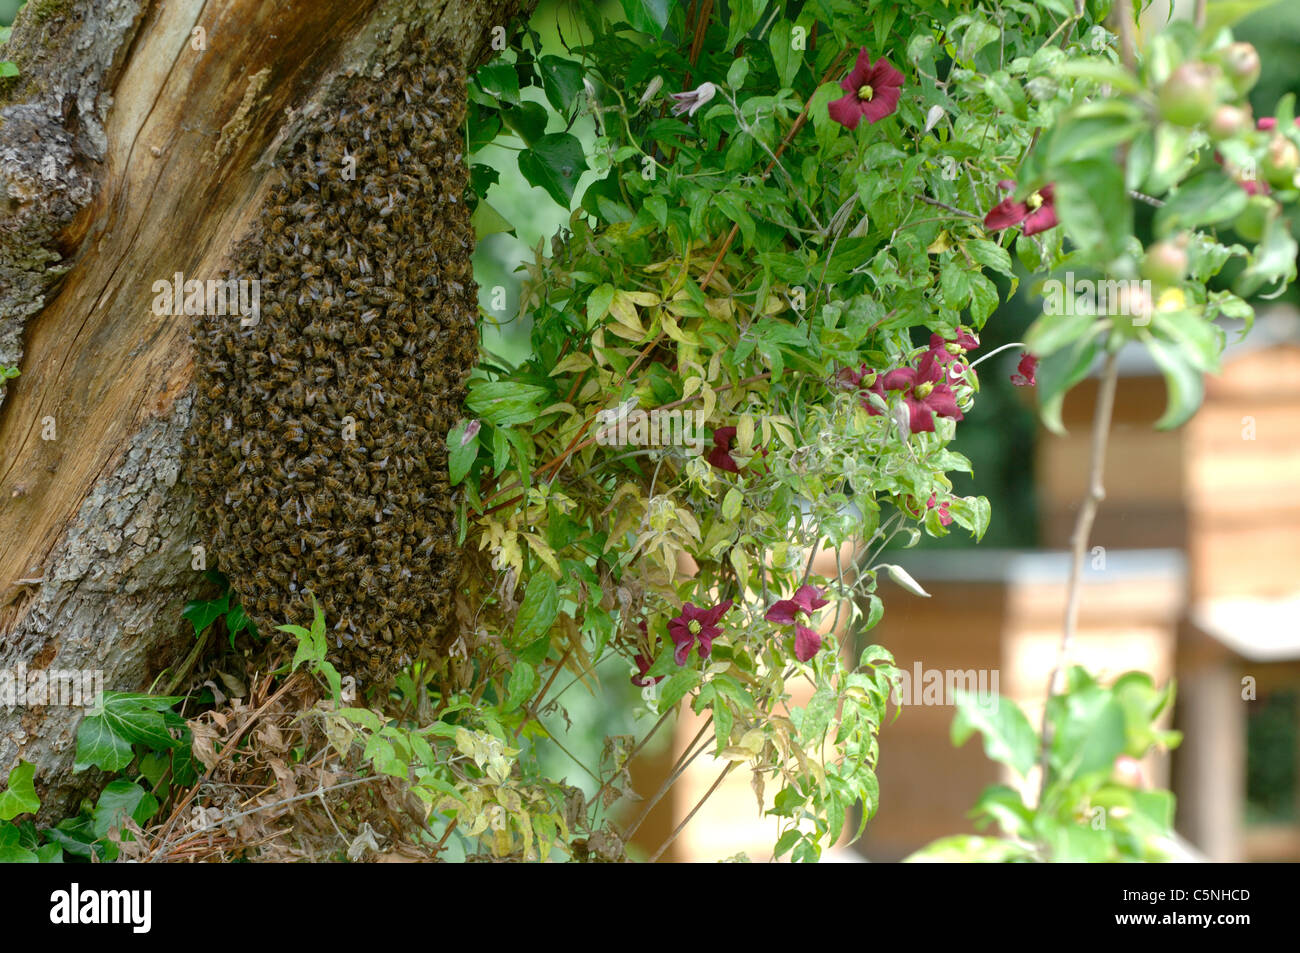 Swarm of bees clustered on an old apple tree with hives in background Stock Photo